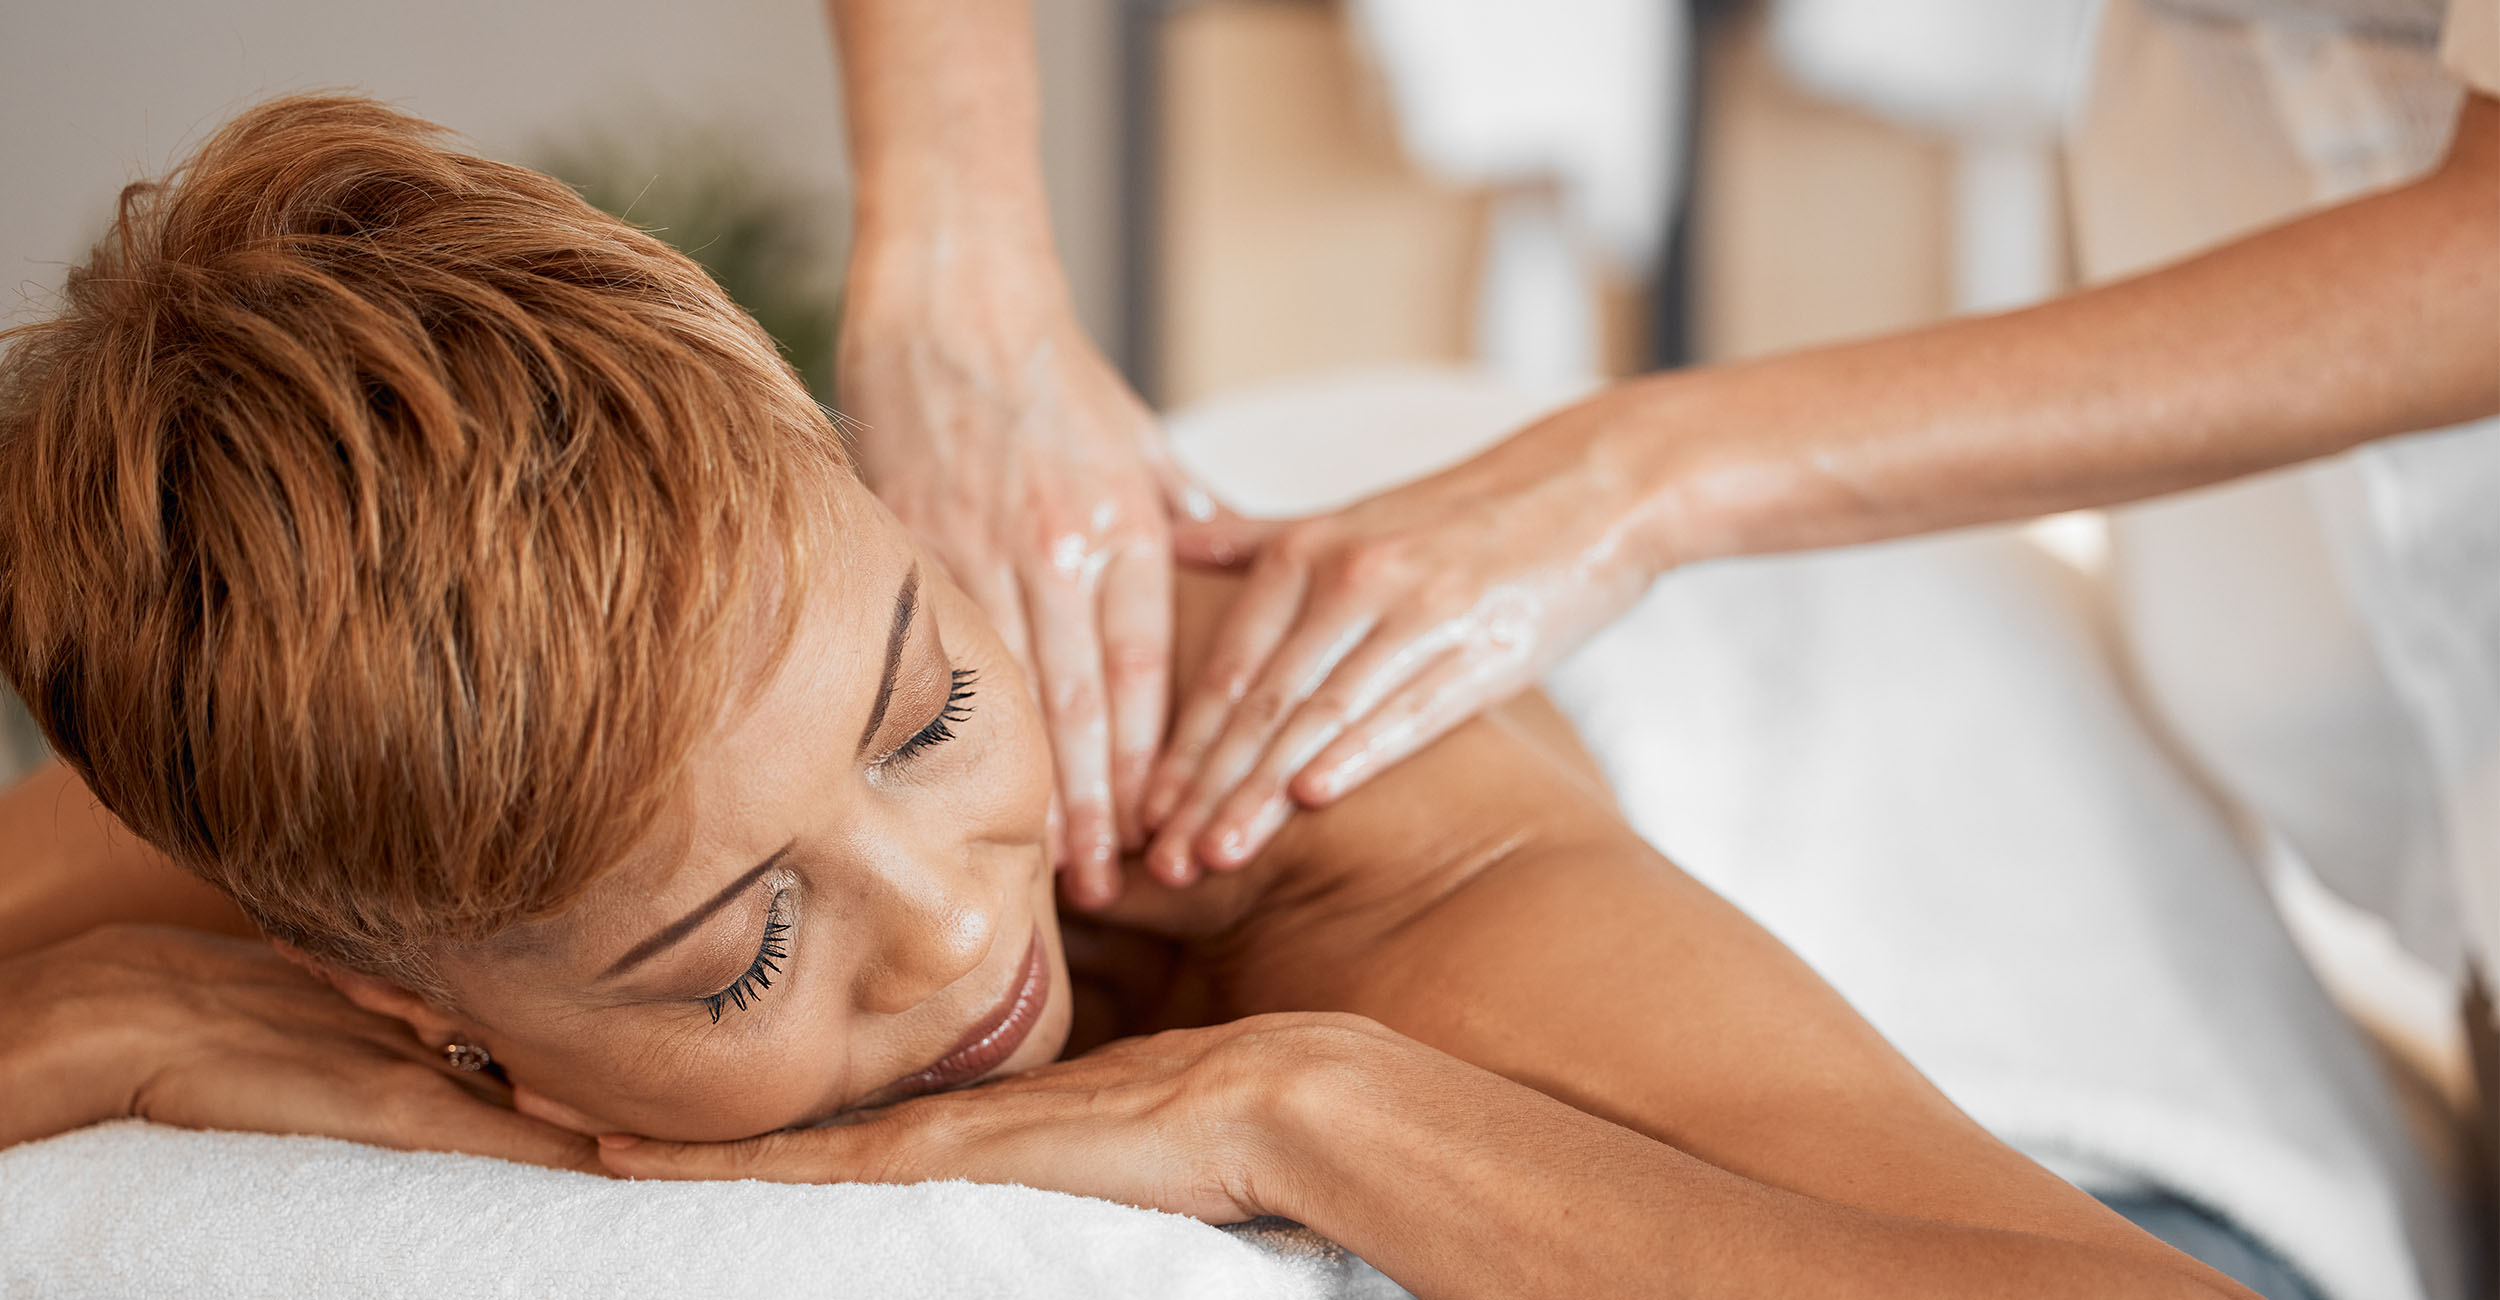 Defining Beauty Wellness & Med Spa offers Massage Therapy services in Tampa, FL.